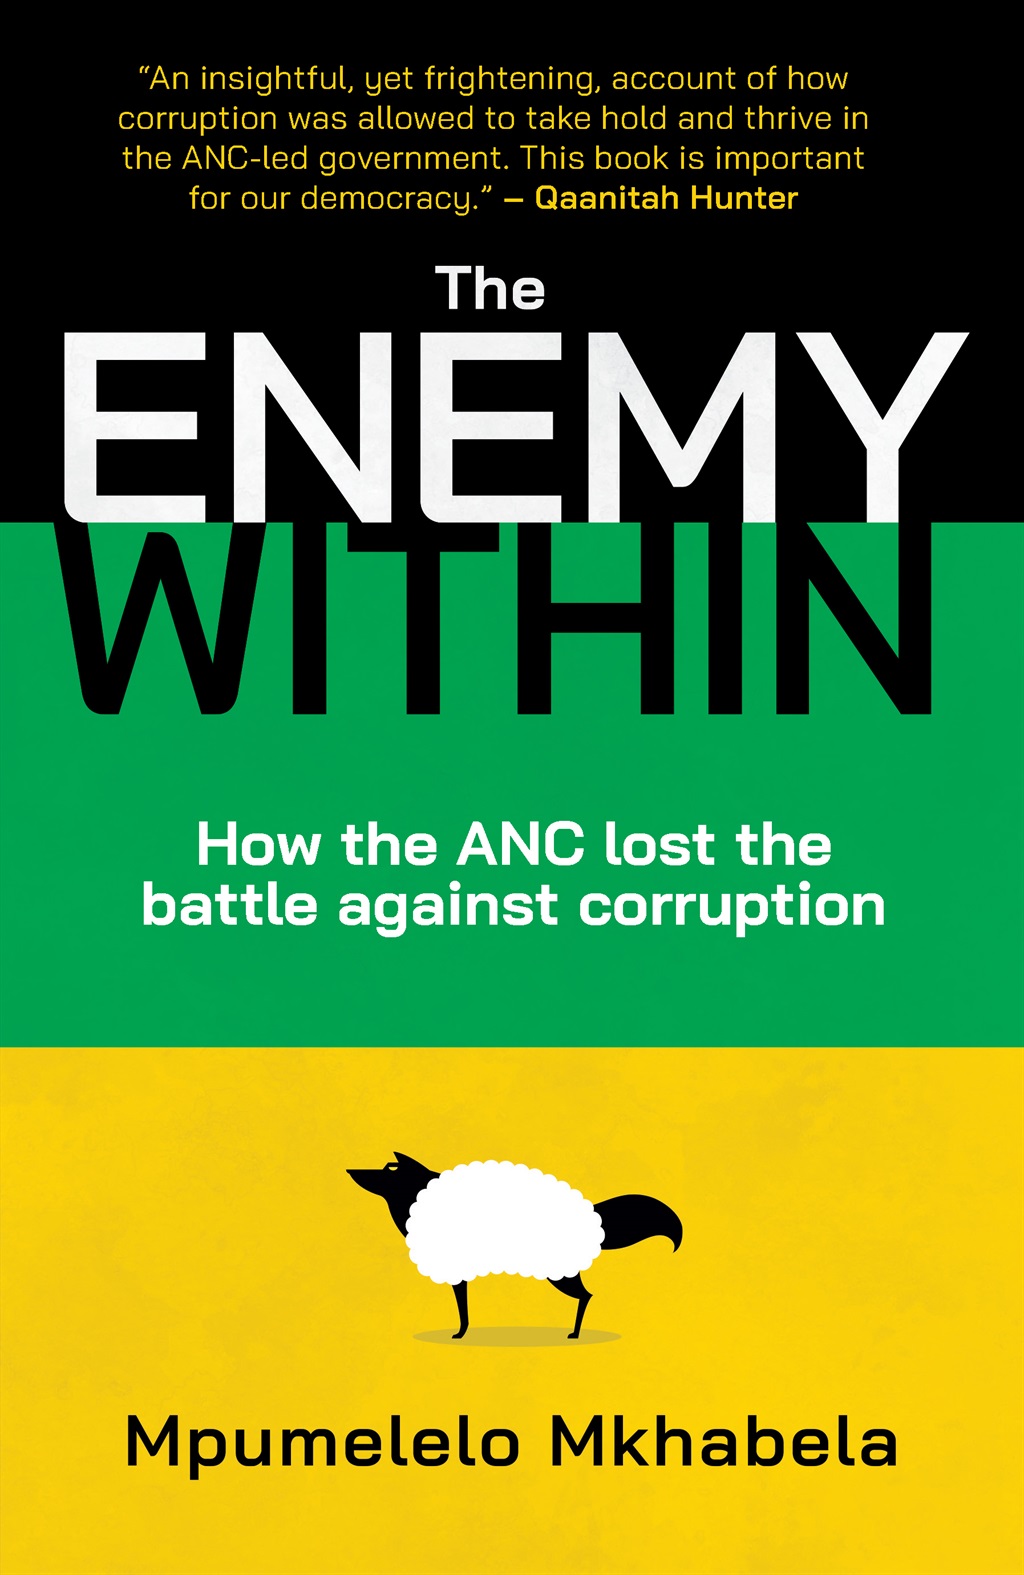 The Enemy Within: How the ANC Lost the Battle against Corruption by Mpumelelo Mkhabela. (Tafelberg)